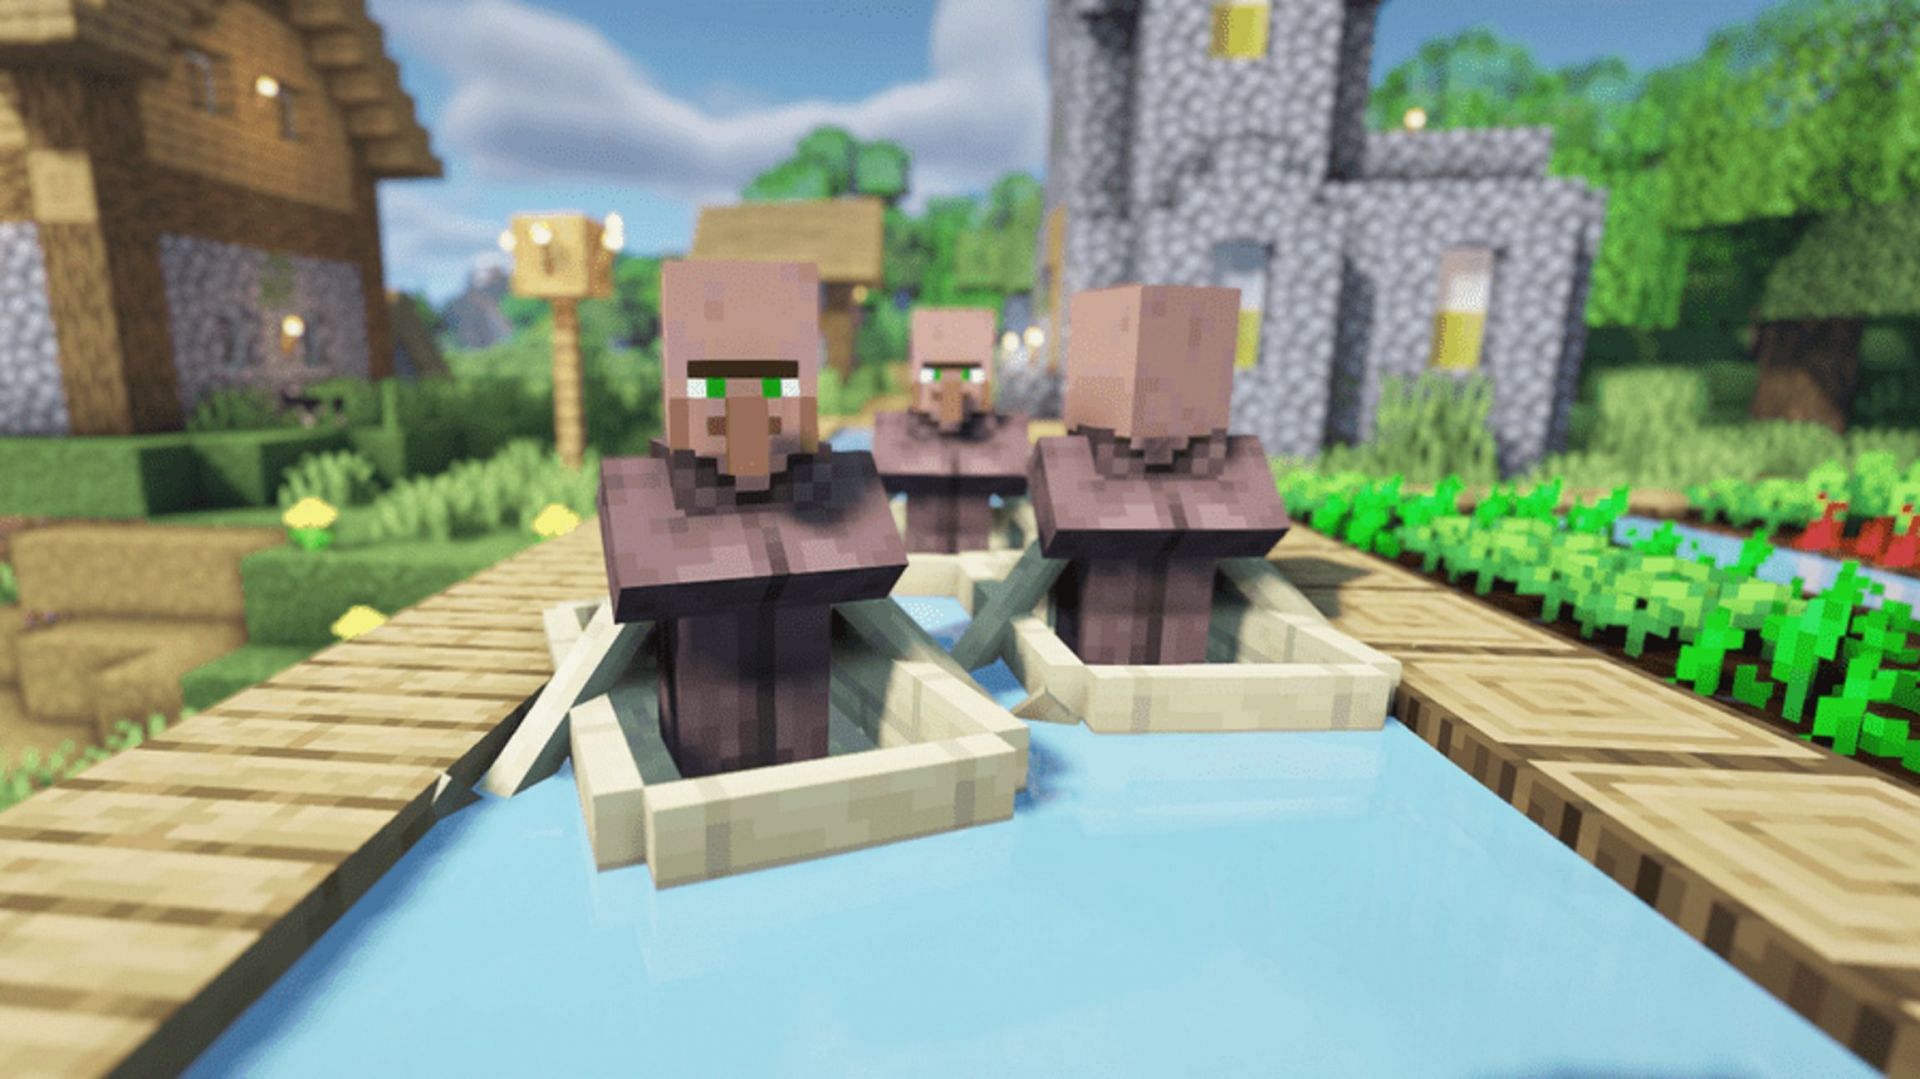 Moving Minecraft villagers in boats requires little resources (Image via Mojang)